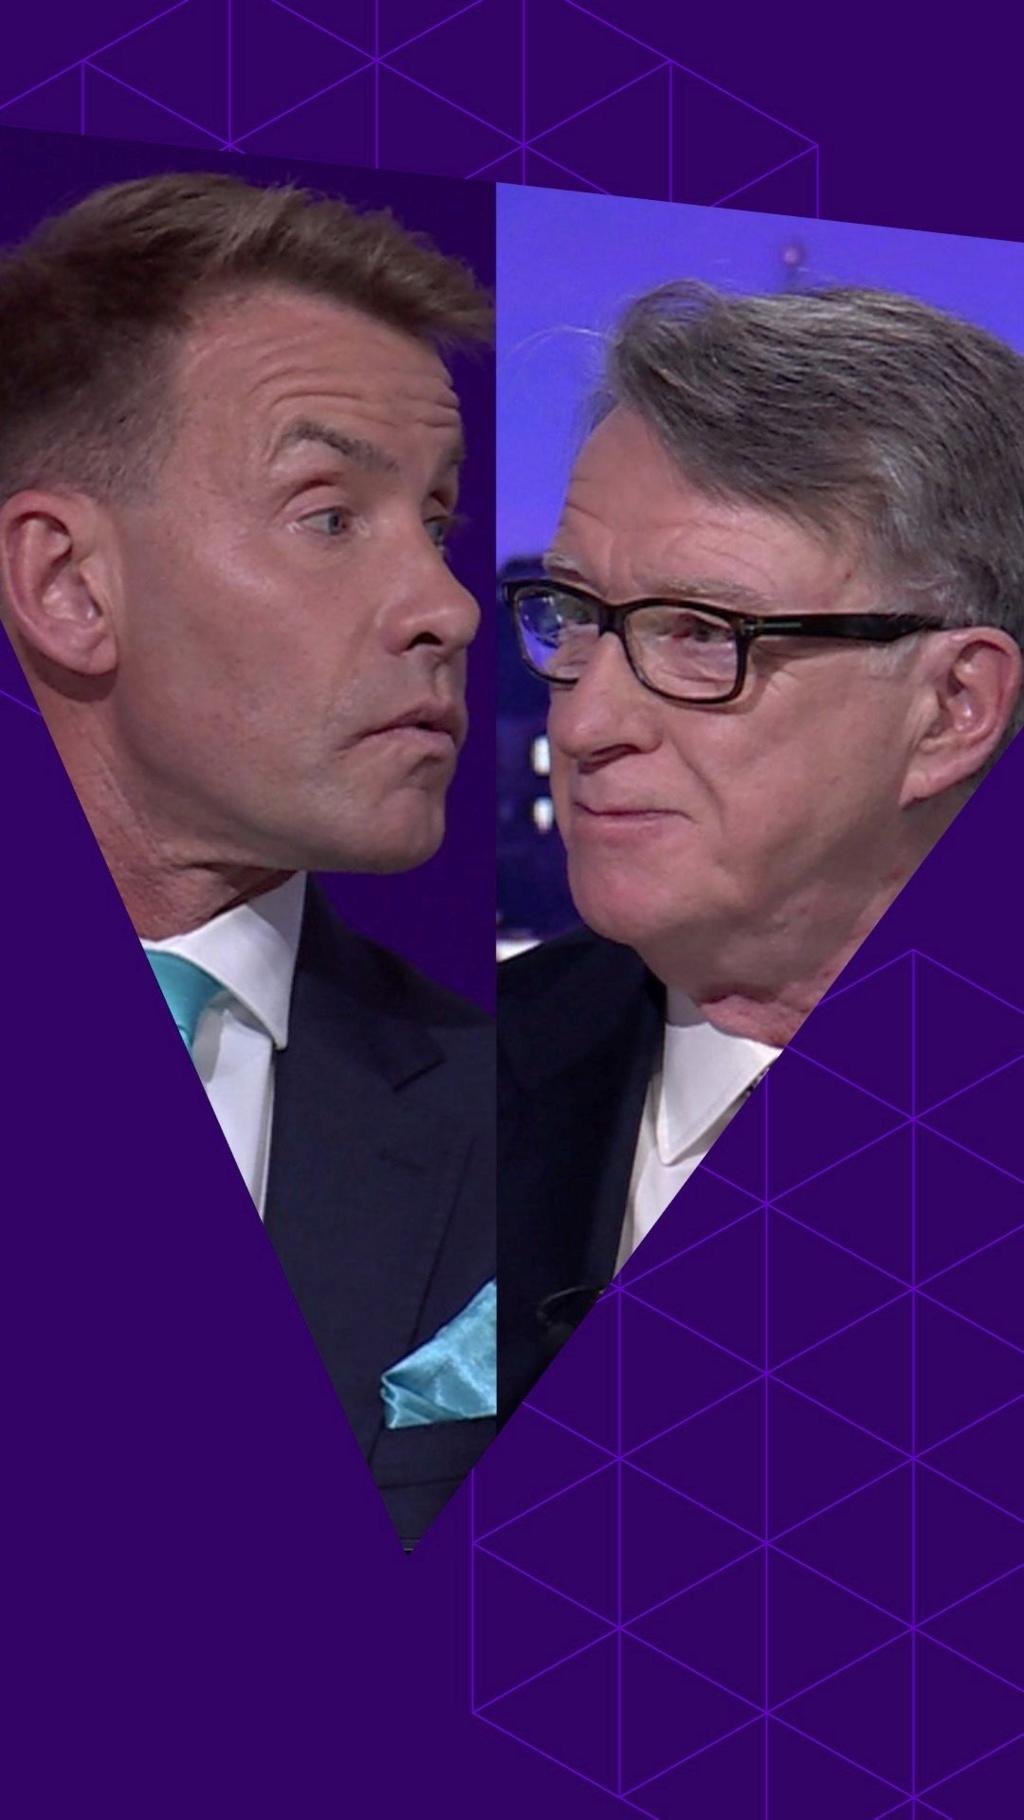 Composite image of David Bull and Peter Mandelson looking at each other